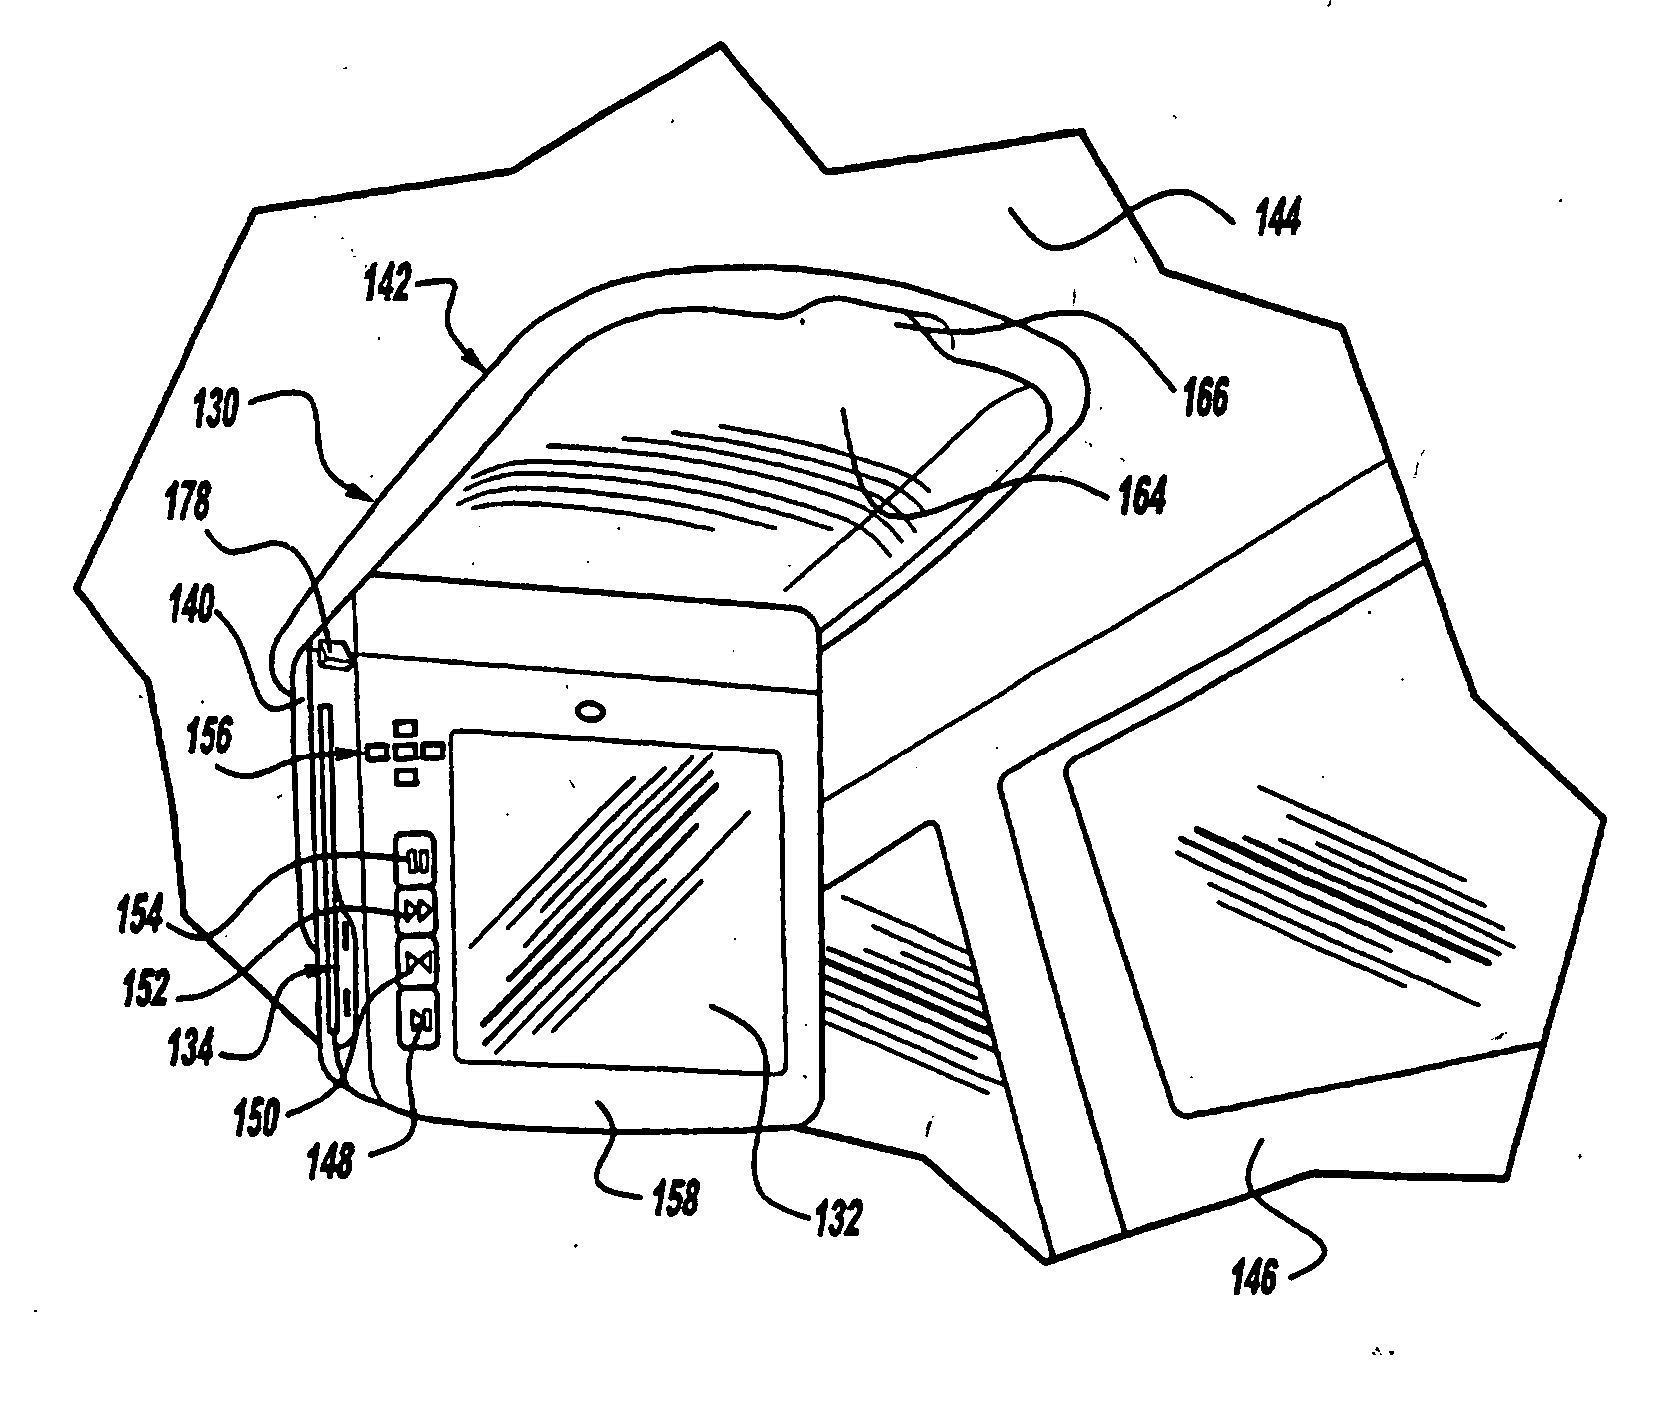 Video display system for a vehicle